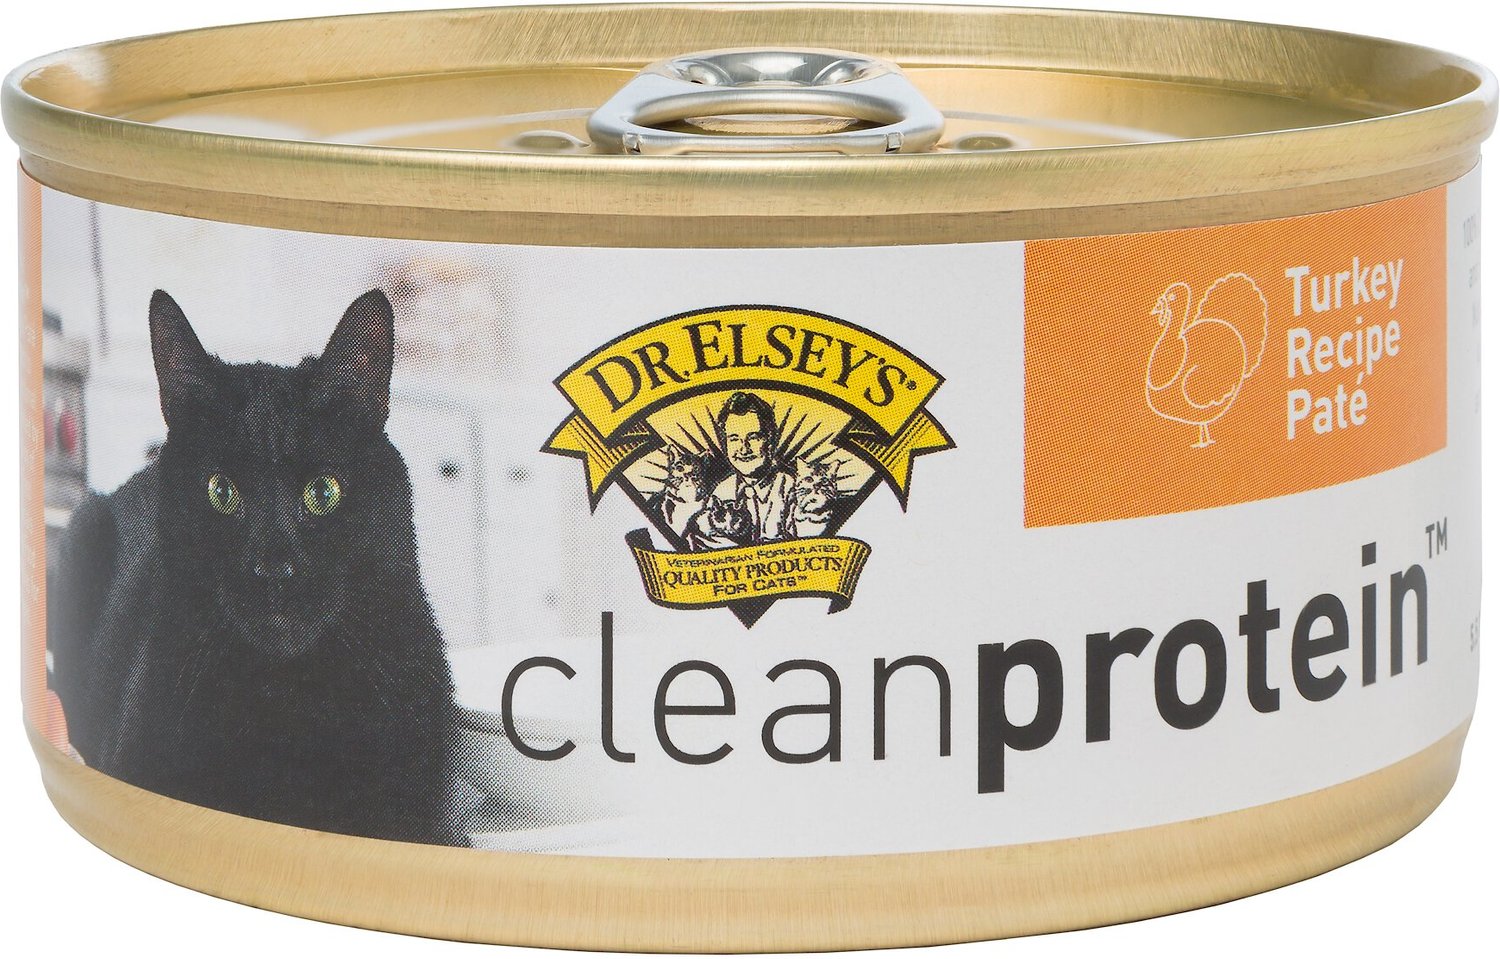 Dr. Elsey's cleanprotein Turkey Formula GrainFree Canned Cat Food, 5.5